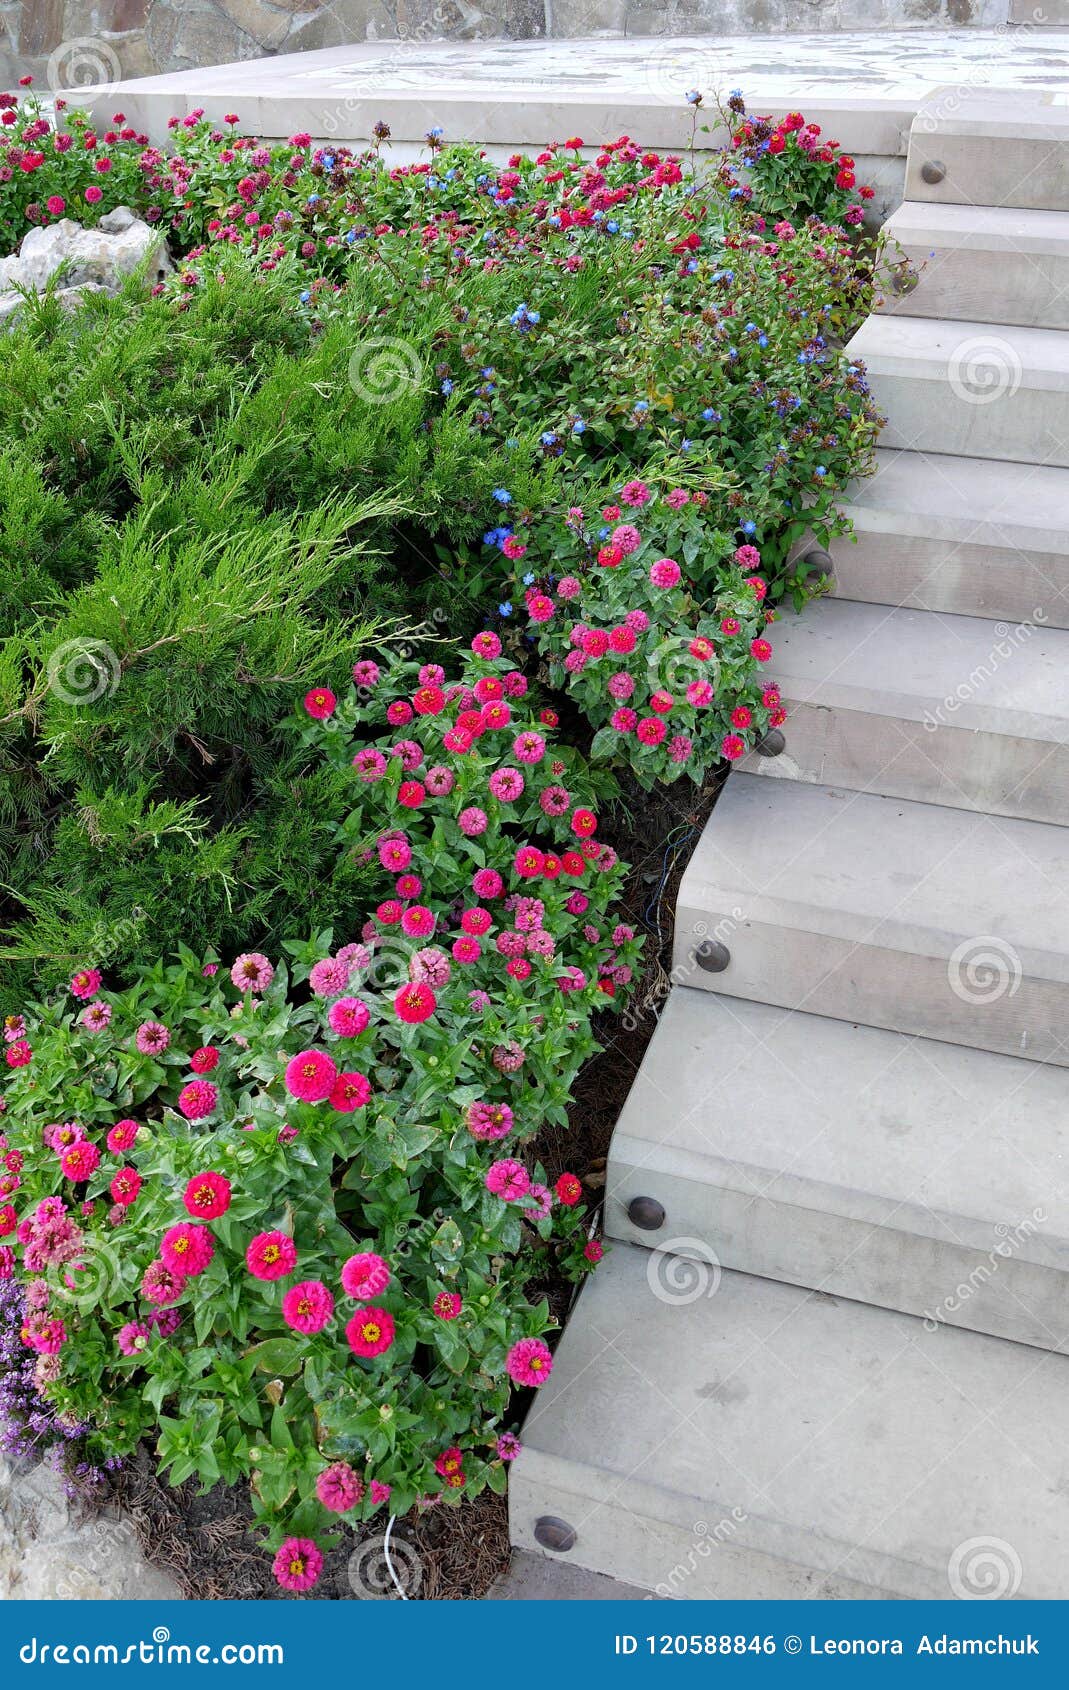 Decorative Flower Bed With Evergreen Plants And Small Claret